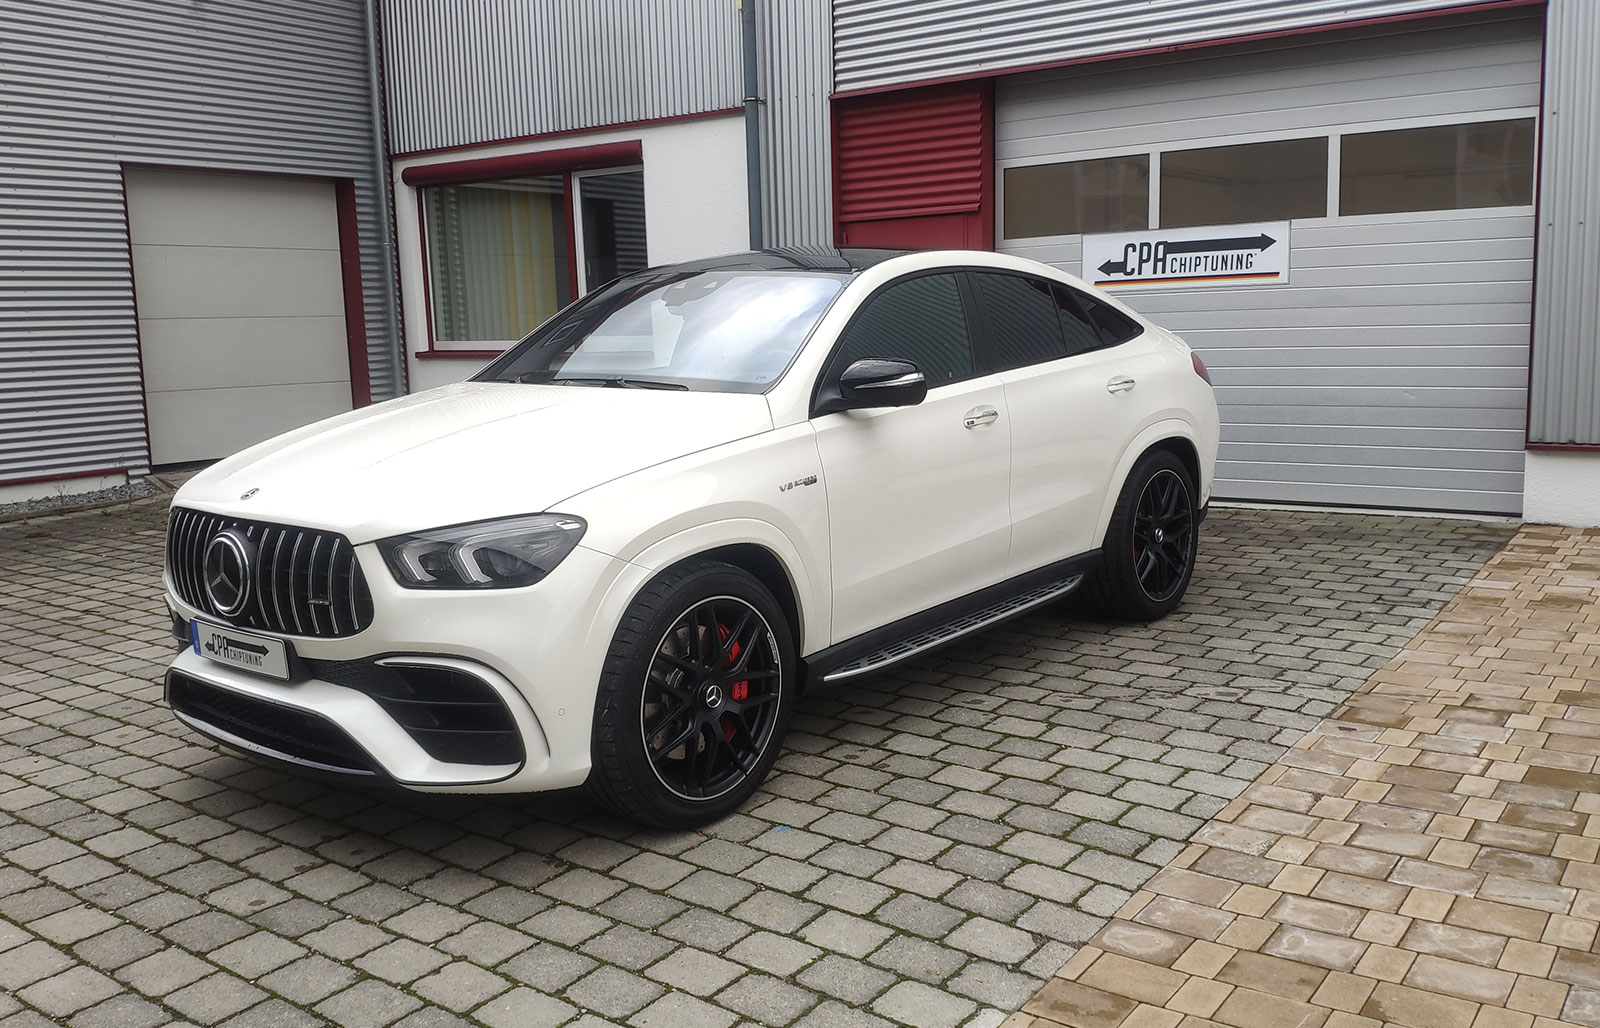 Mercedes GLE-Class (C167) GLE63 S AMG 4MATIC + Coupe チップチューニング